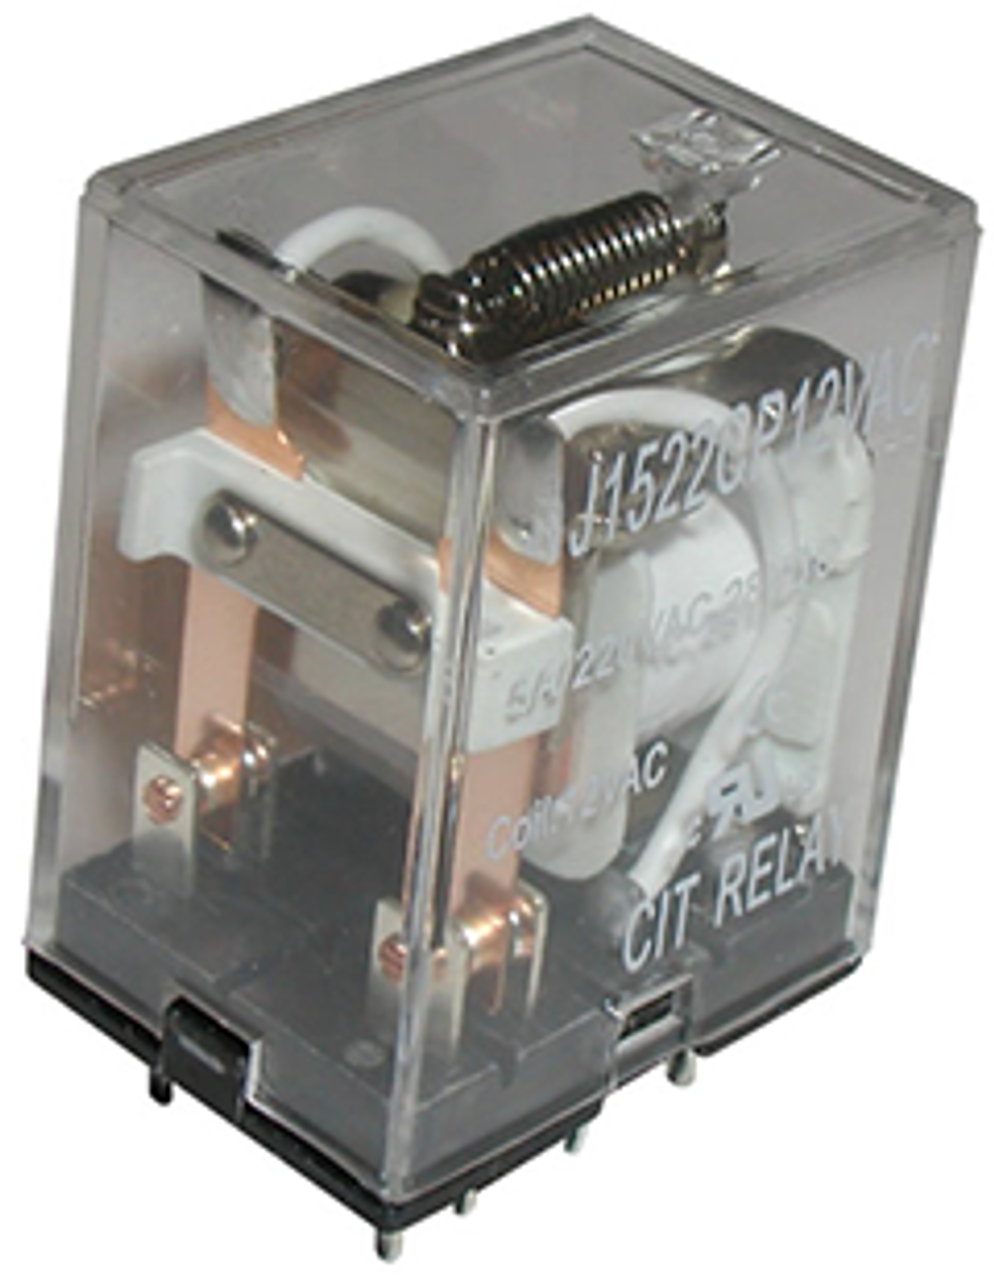 CIT Relay and Switch J1522CT12VDCDT Industrial Relays